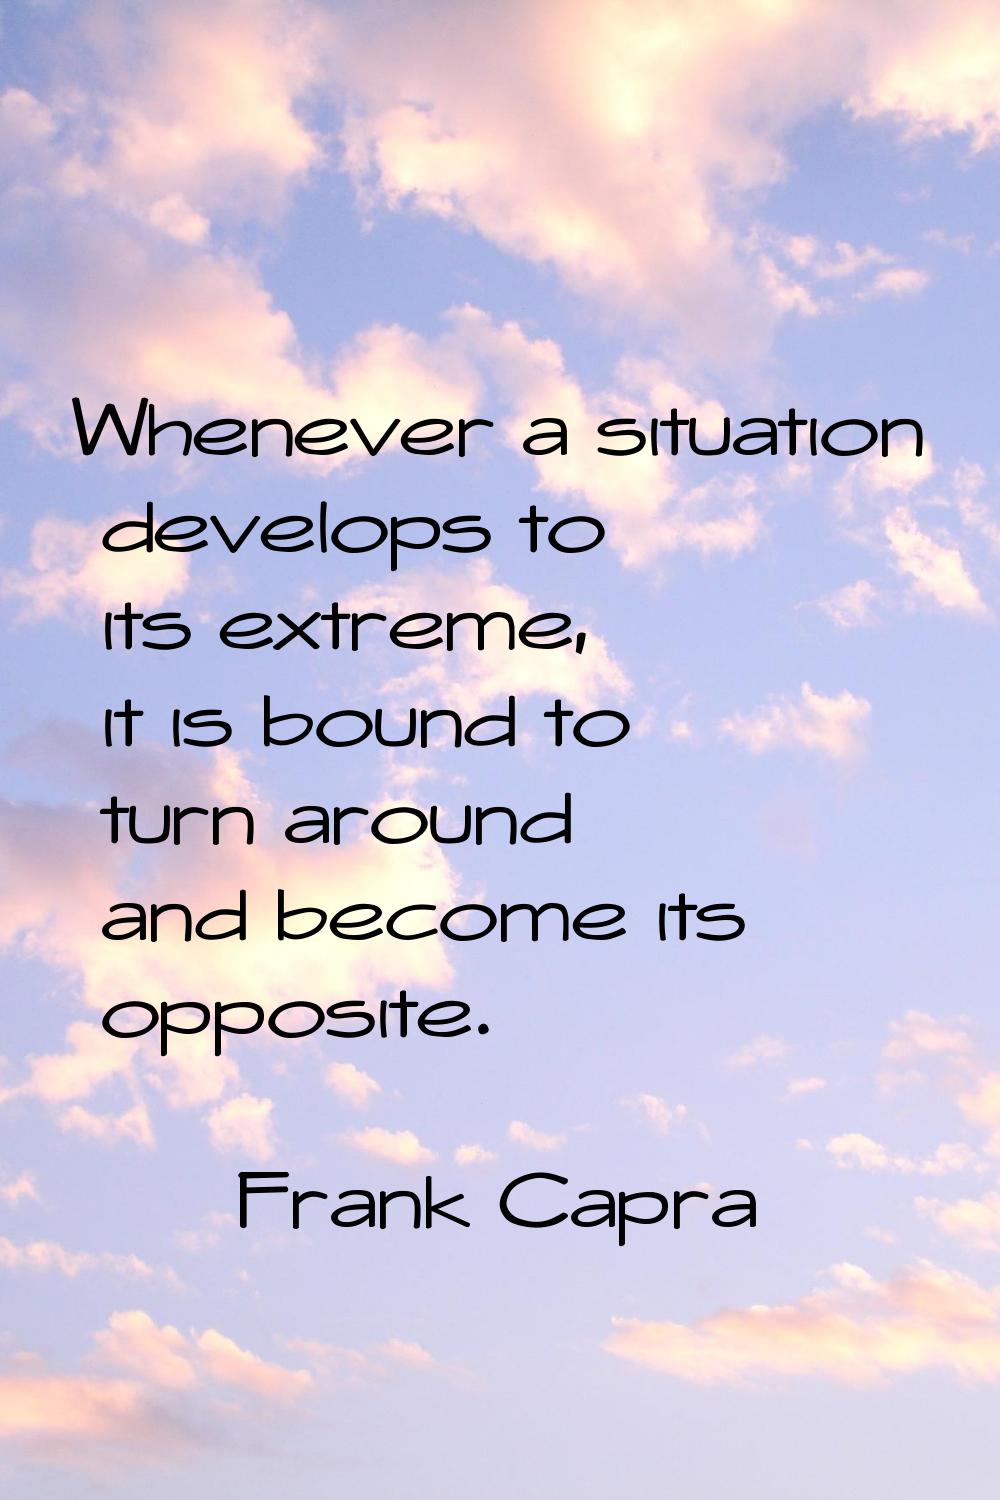 Whenever a situation develops to its extreme, it is bound to turn around and become its opposite.